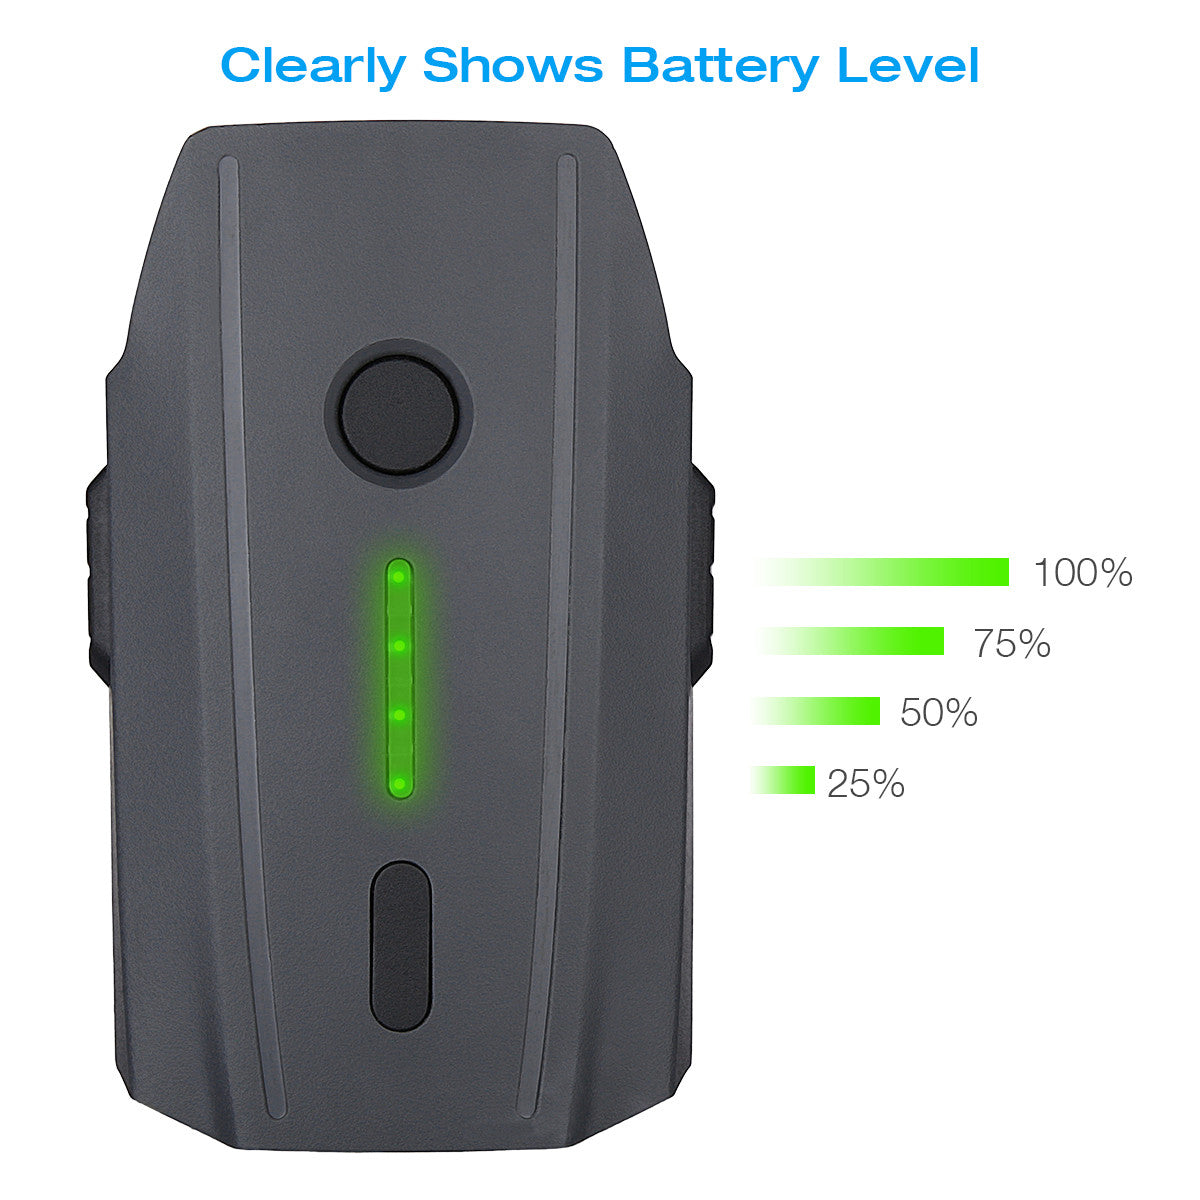 Powerextra Battery Replacement for 11.4V DJI Mavic Pro with Battery Safe Bag